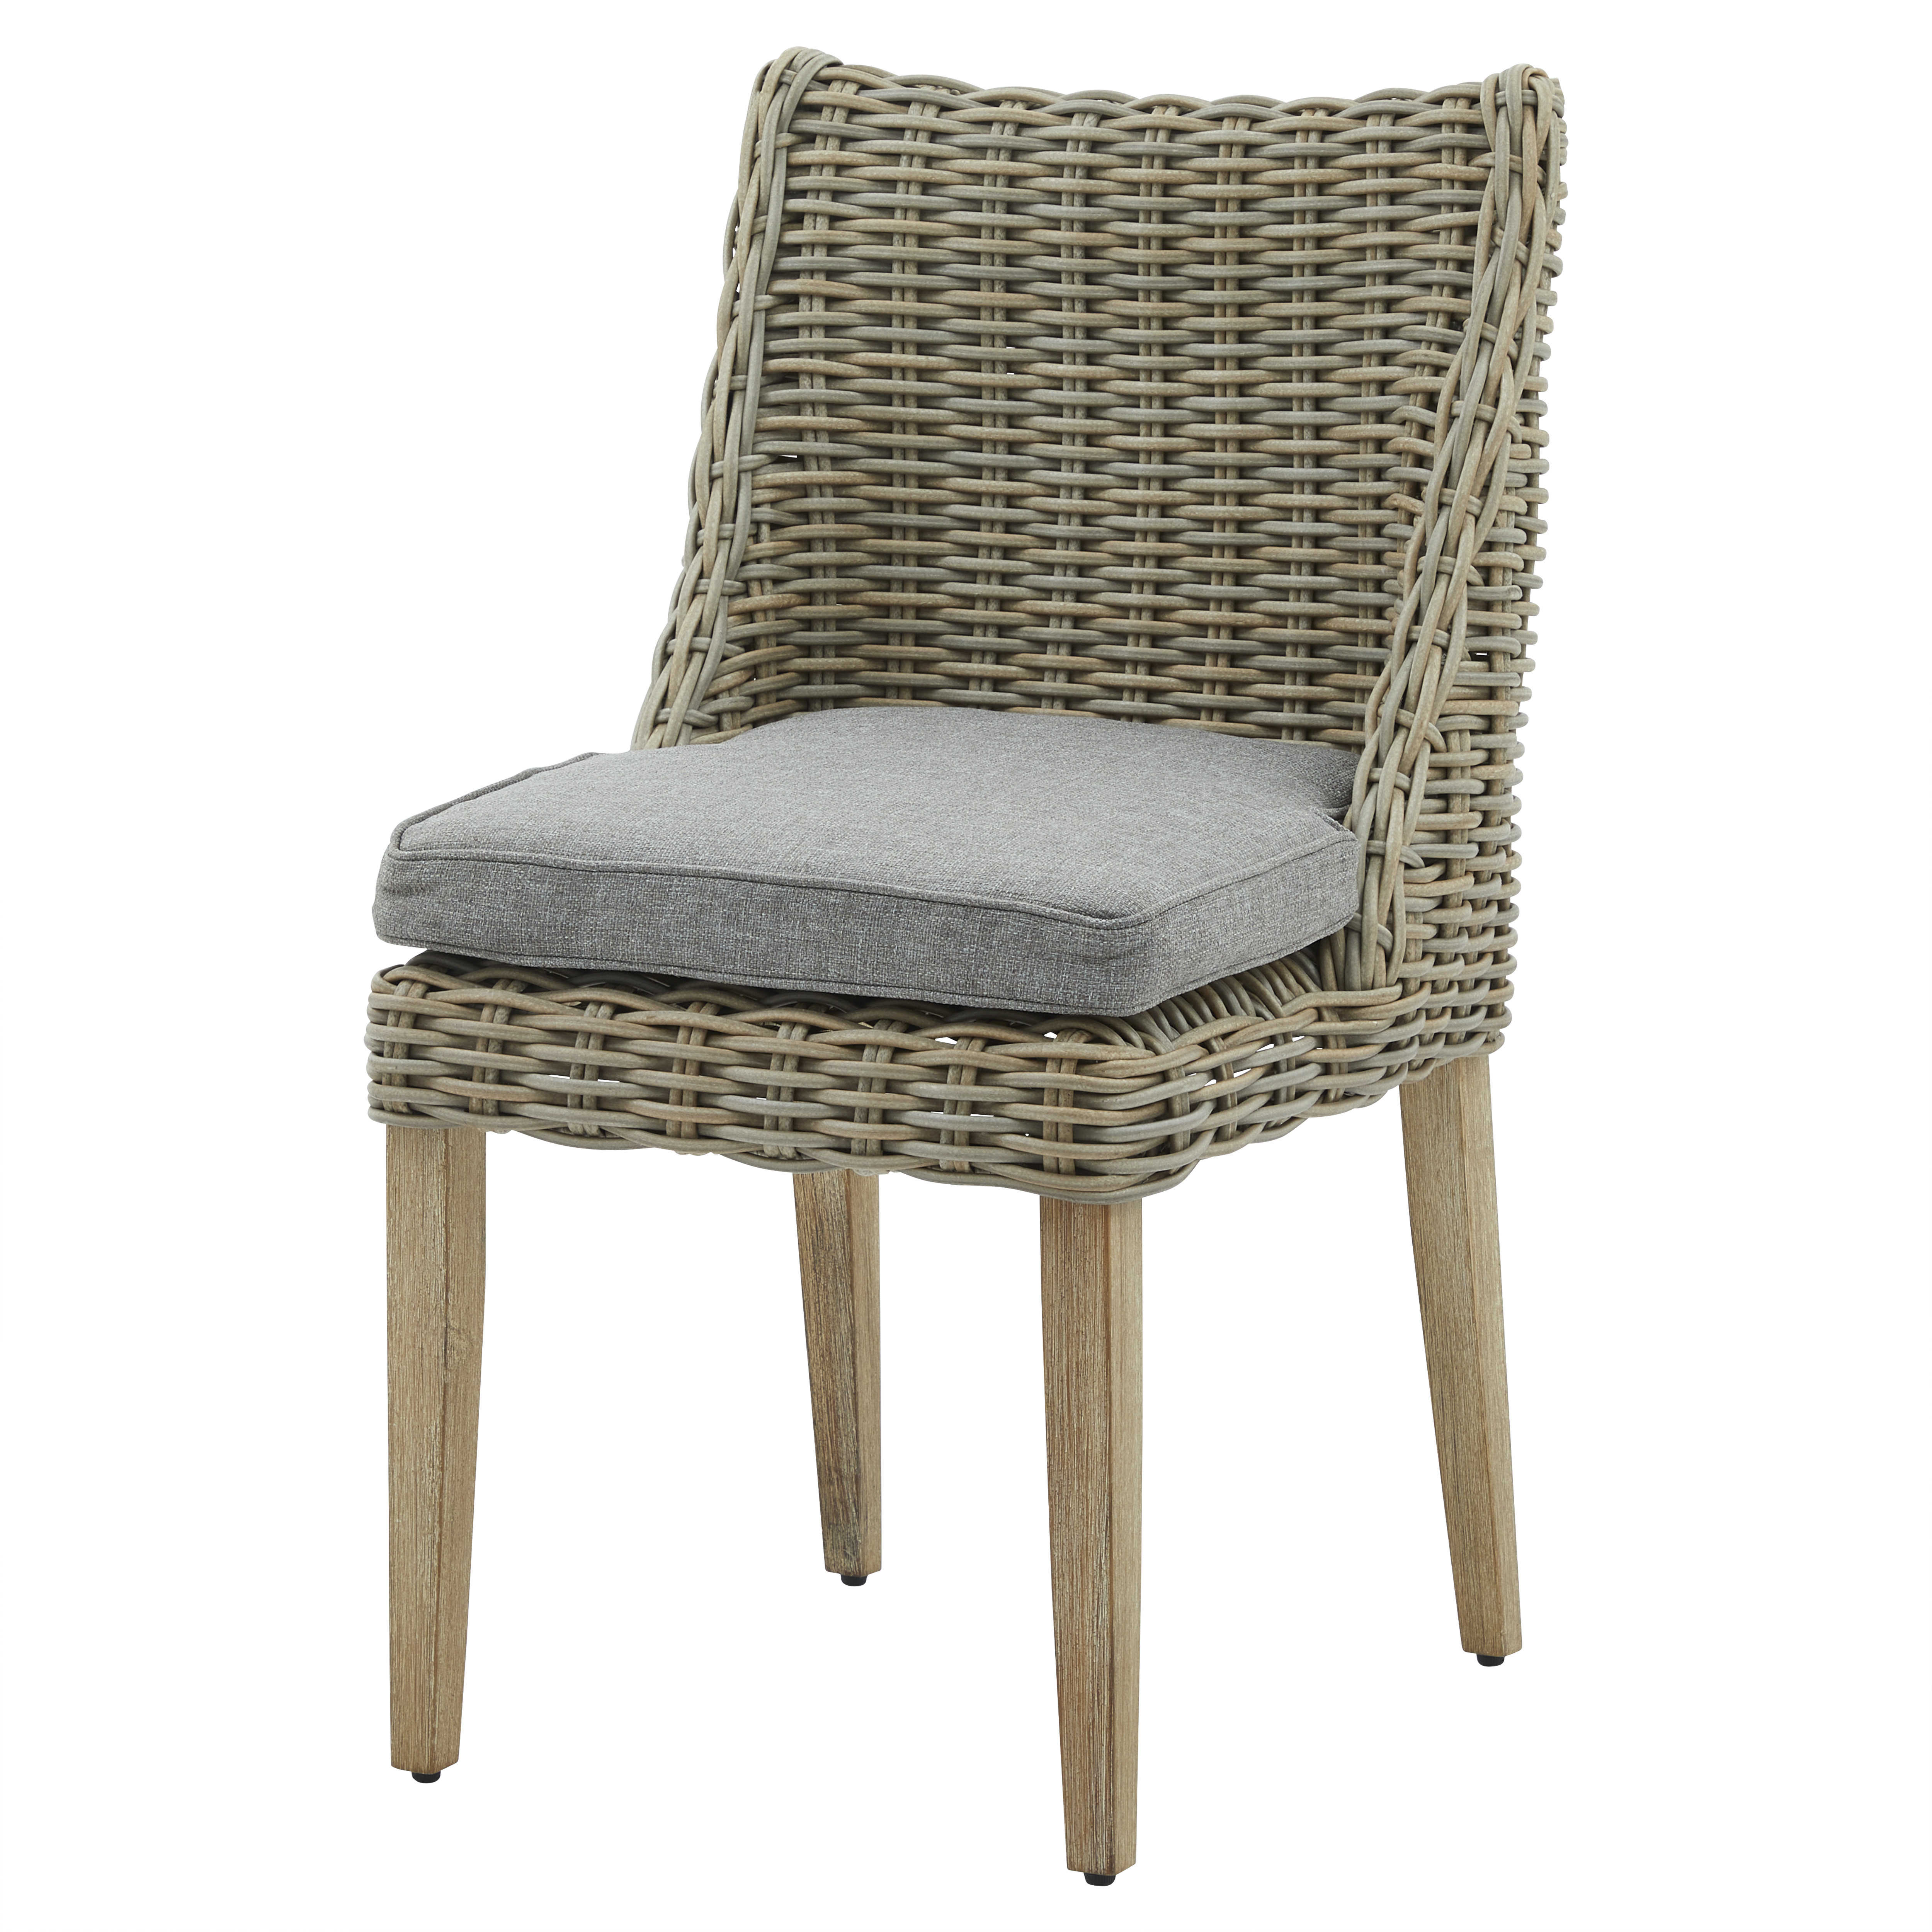 Capri Collection Outdoor Round Dining Chair - Image 1